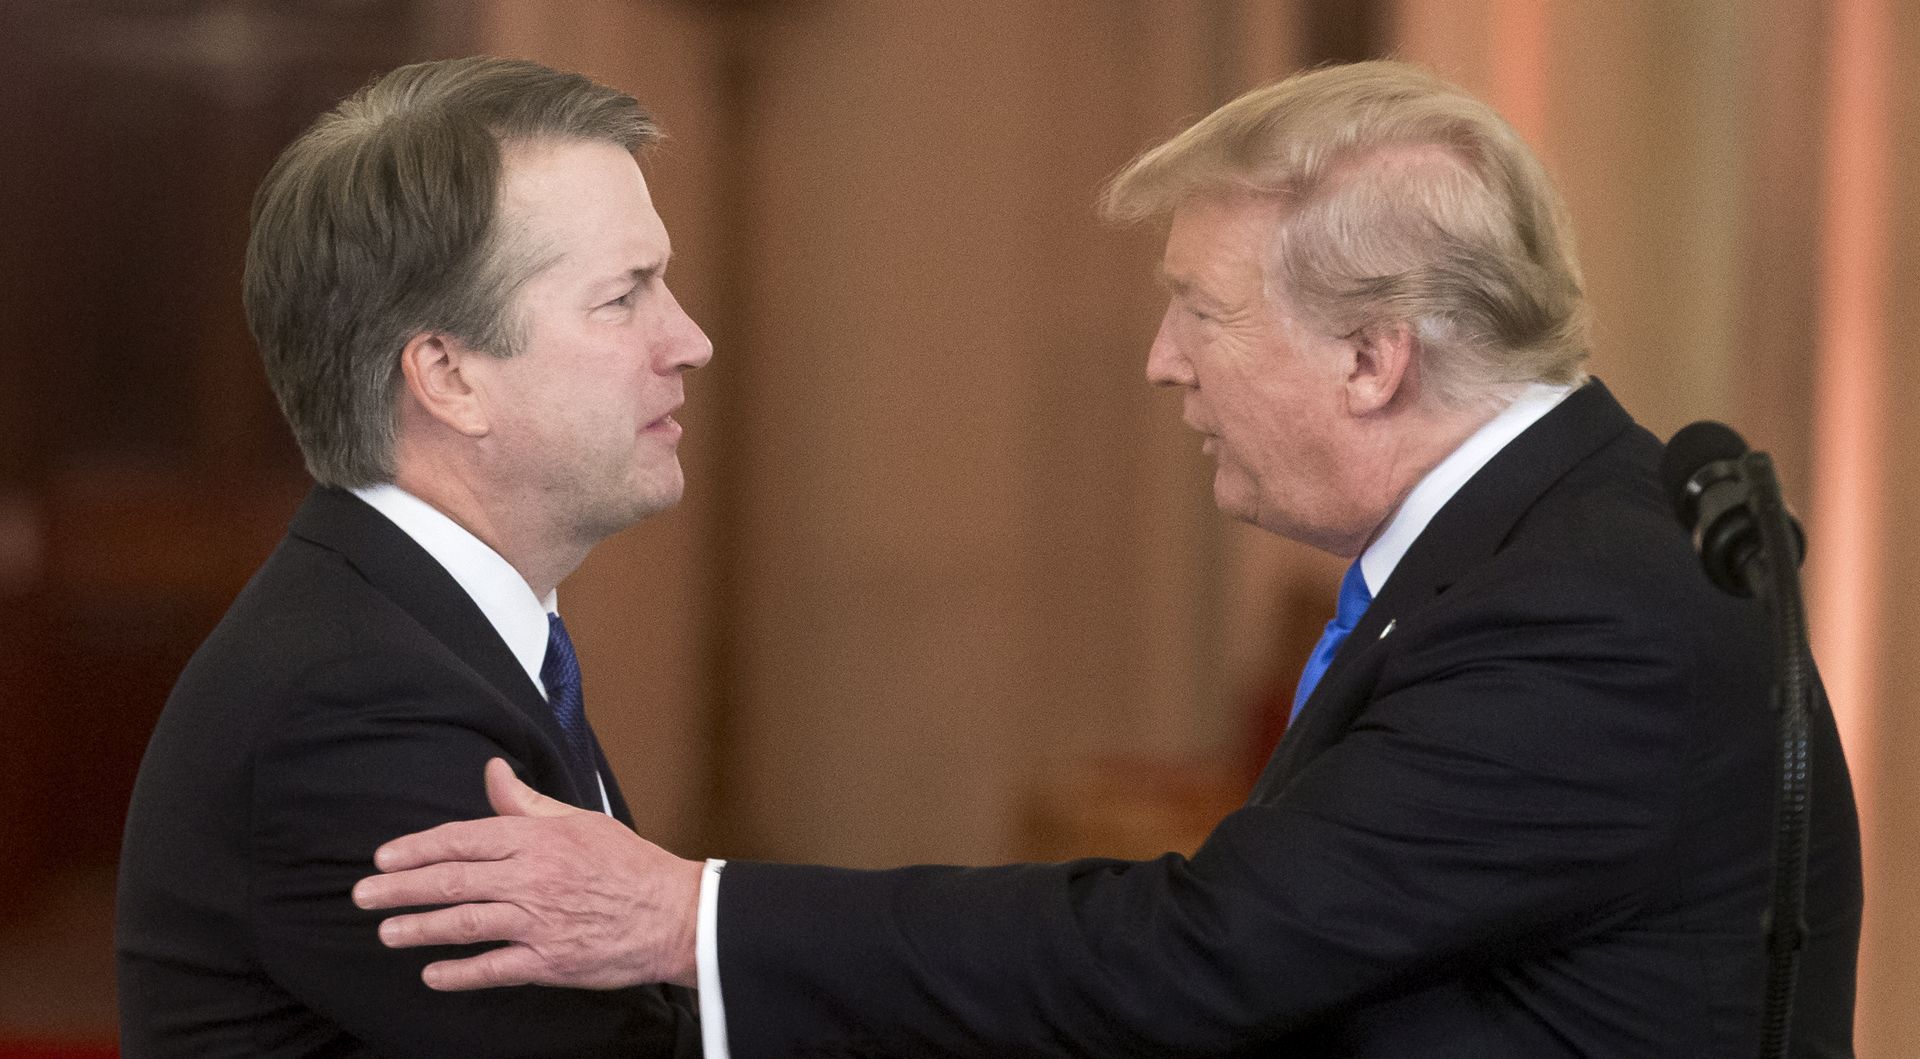 epa06876901 US President Donald J. Trump (R) announces Federal appeals court judge Brett Kavanaugh (L) as his nominee to replace retiring Supreme Court Justice Anthony Kennedy, in the East Room of the White House in Washington, DC, USA, 09 July 2018. The confirmation of Trump's Supreme Court nominee is expected to face strong opposition from Senate Democrats, as the balance of the court could be altered with long-lasting effect on controversial laws.  EPA/MICHAEL REYNOLDS